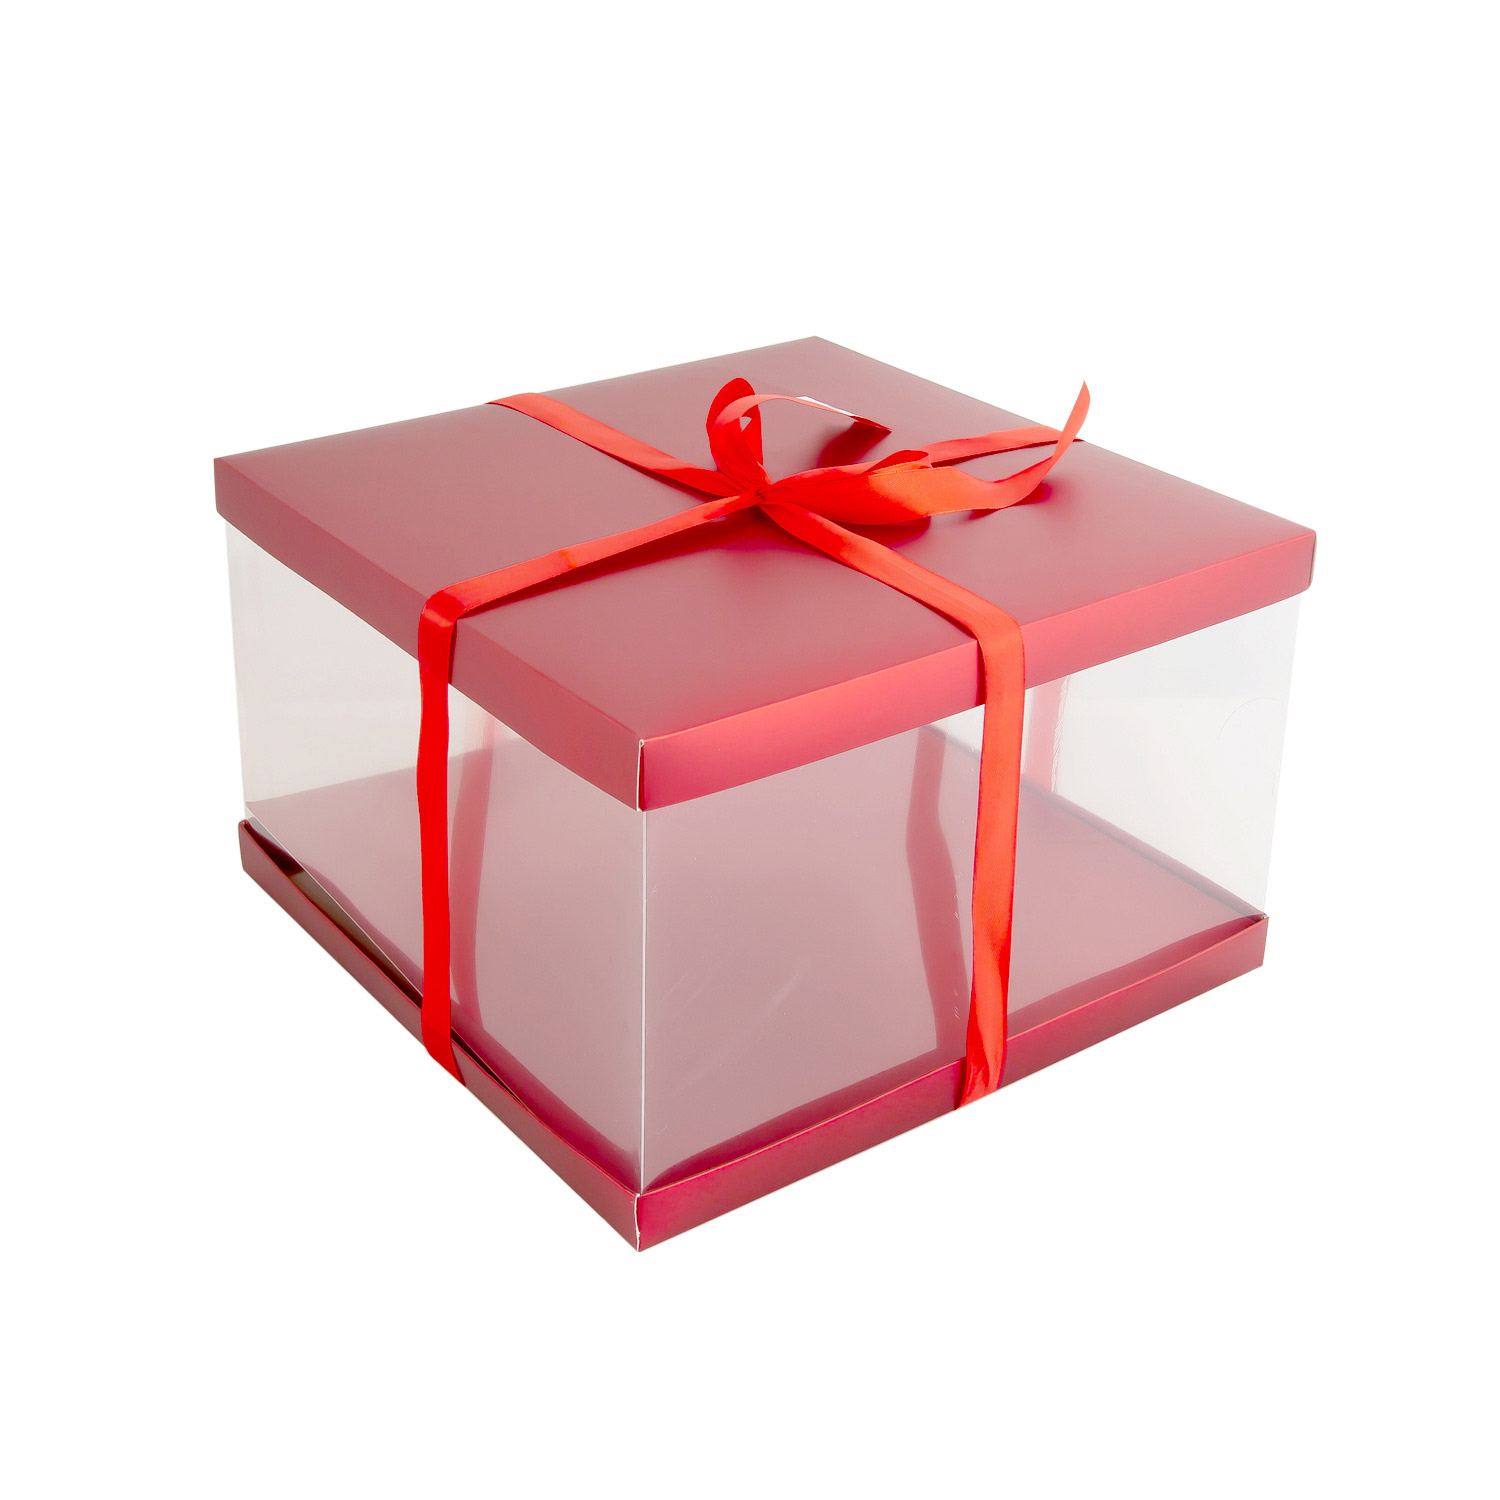 Cake box with Ribbon (Red Colour) 